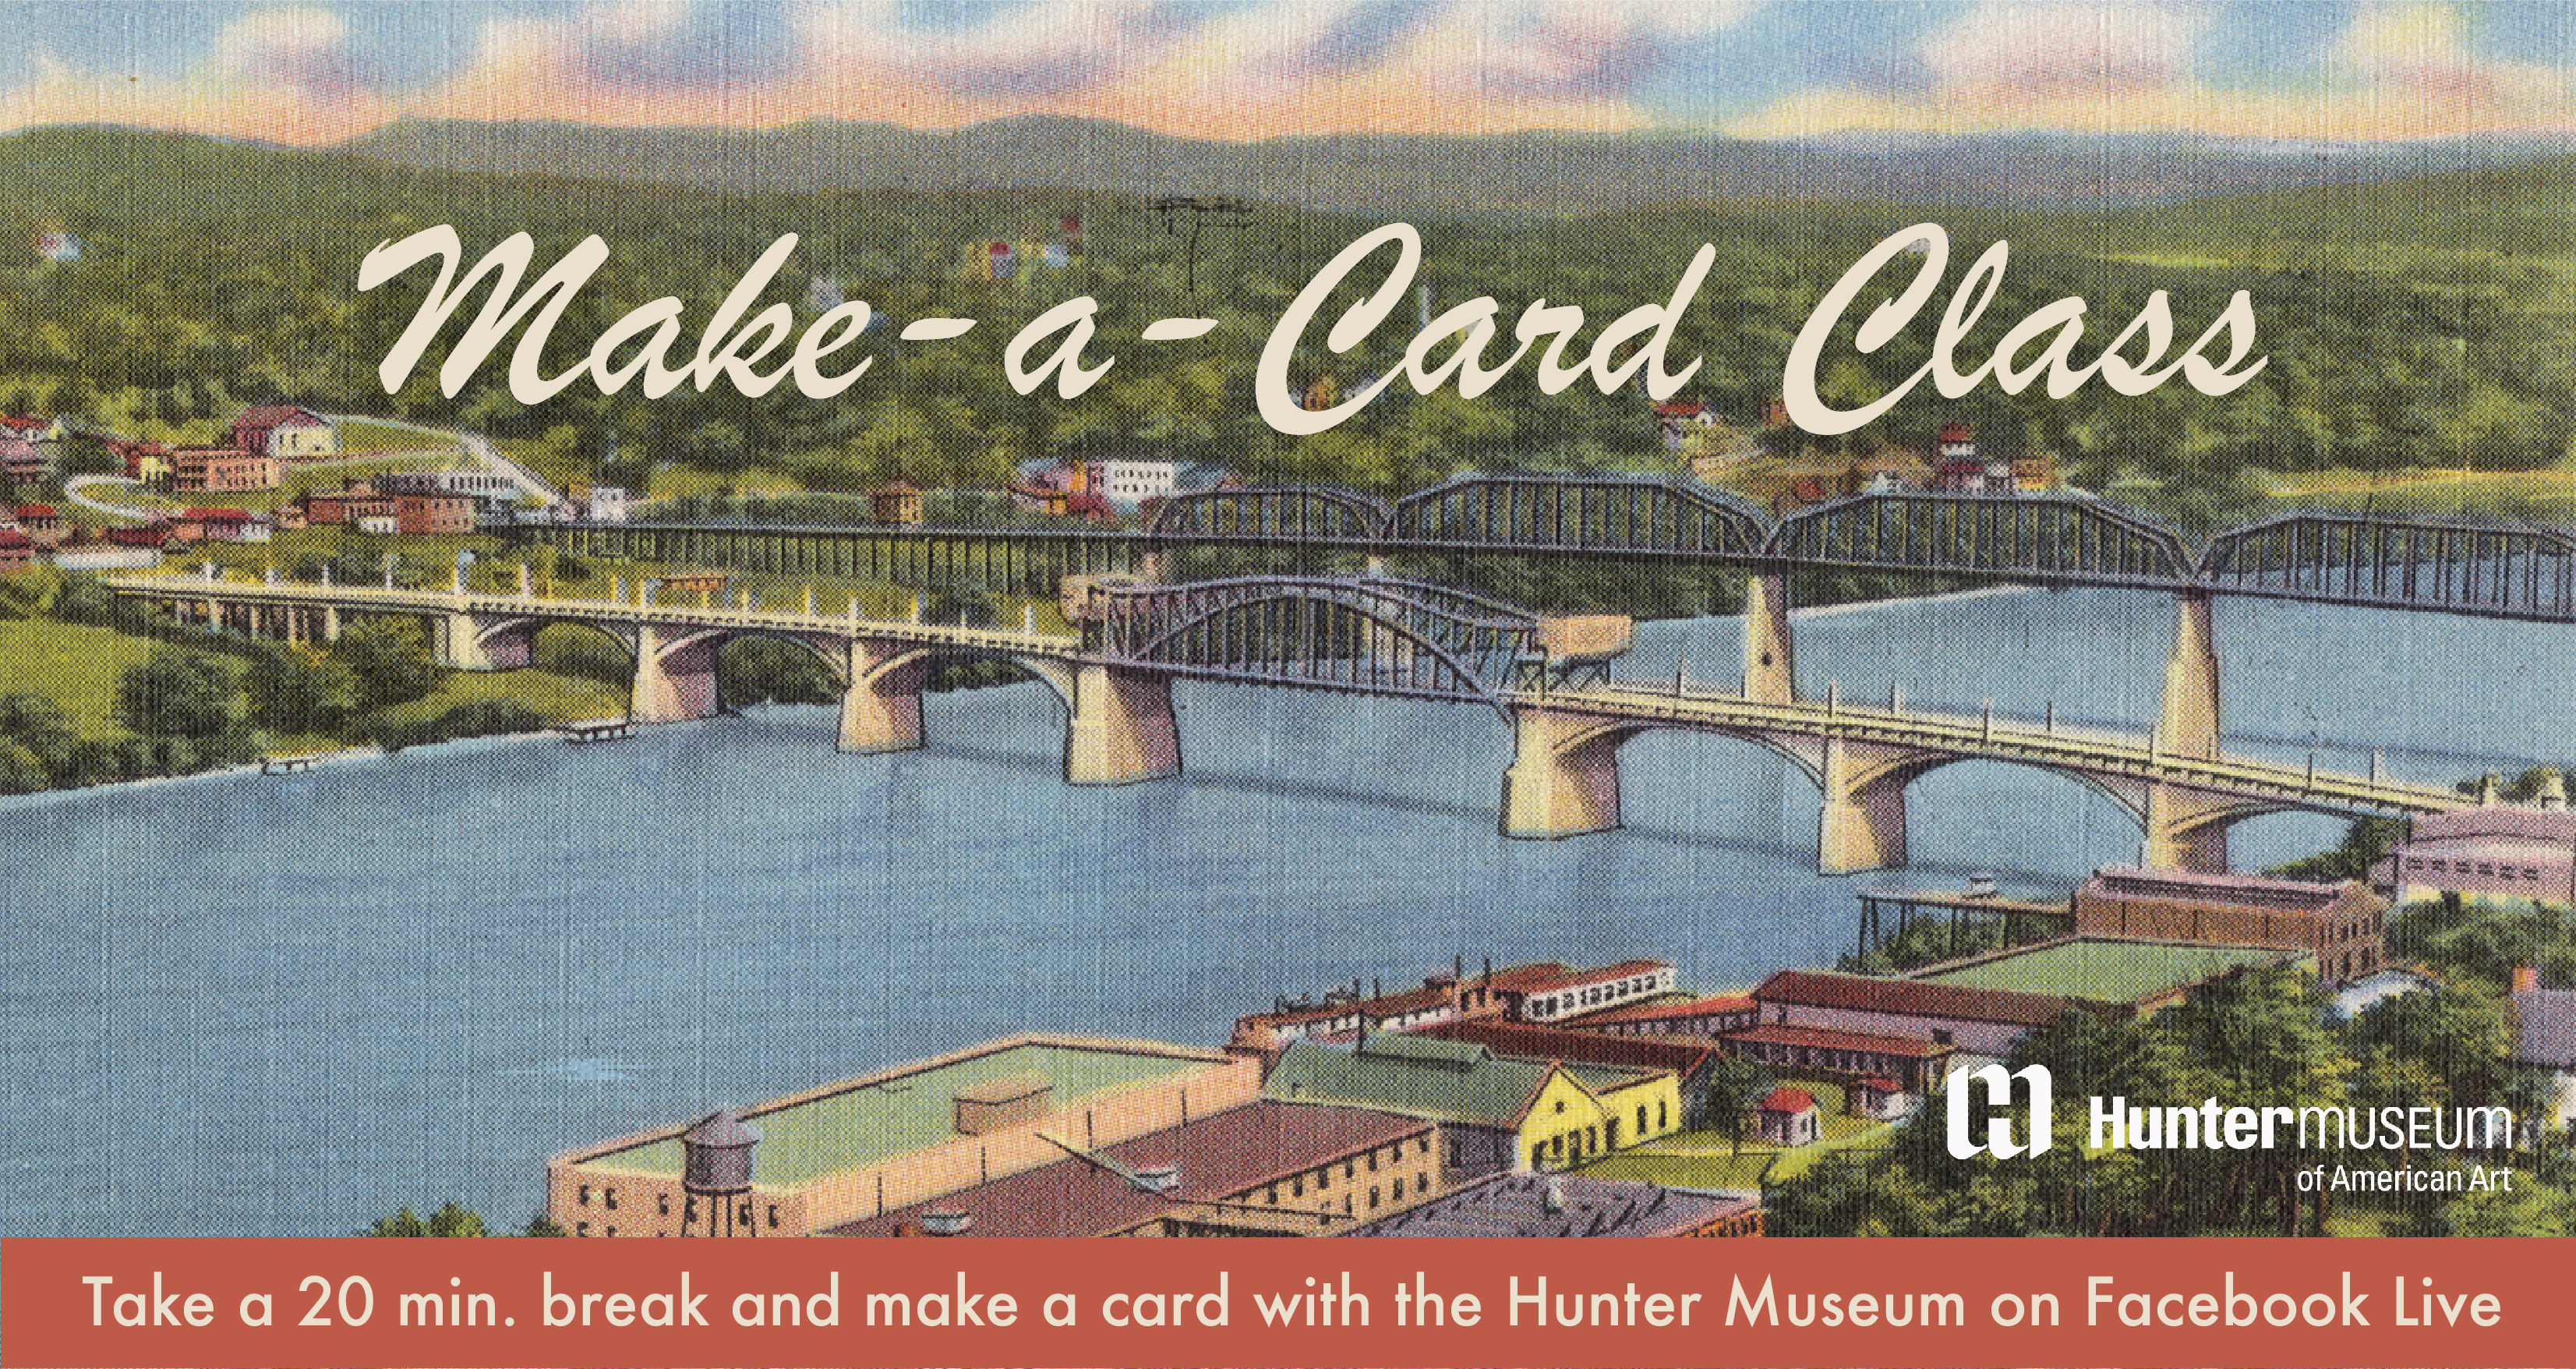 An old-fashioned postcard depicting Chattanooga, TN with the words "Make A Card Class" overlaid